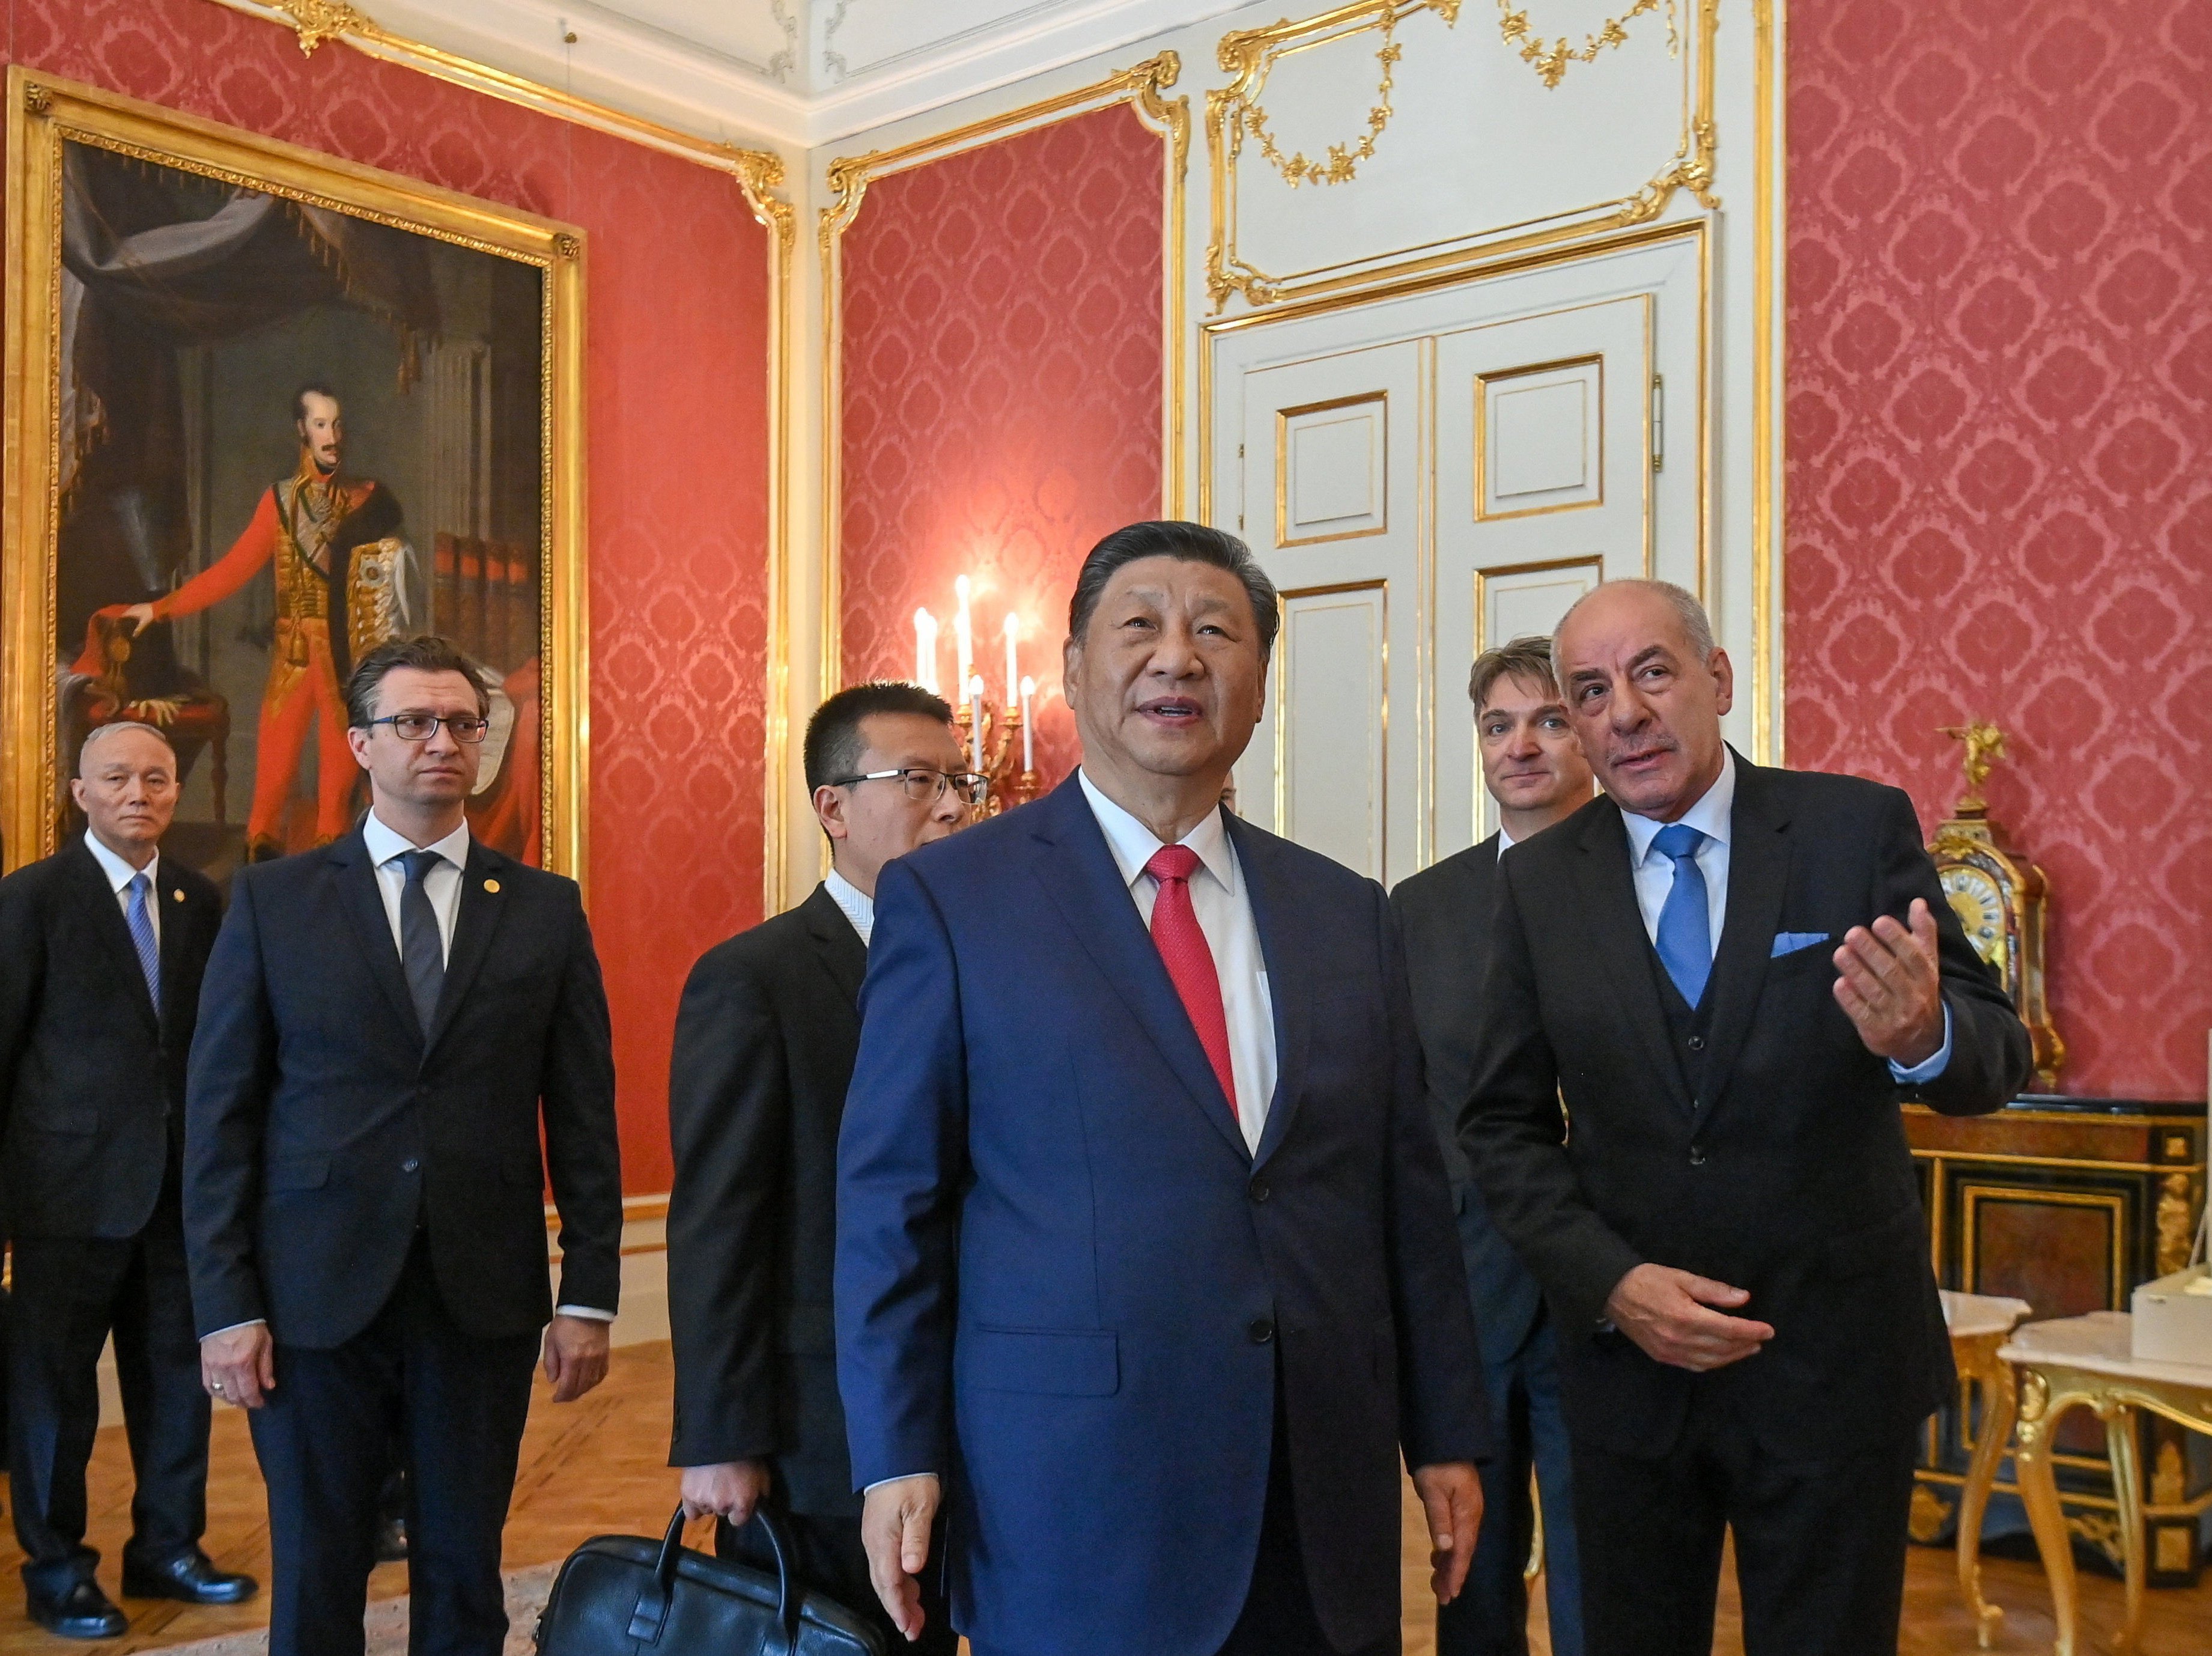 Hungarian President Tamas Sulyok (right) and Chinese President Xi Jinping walk in the presidential Alexander Palace in Budapest, Hungary, on Thursday. Photo: EPA-EFE